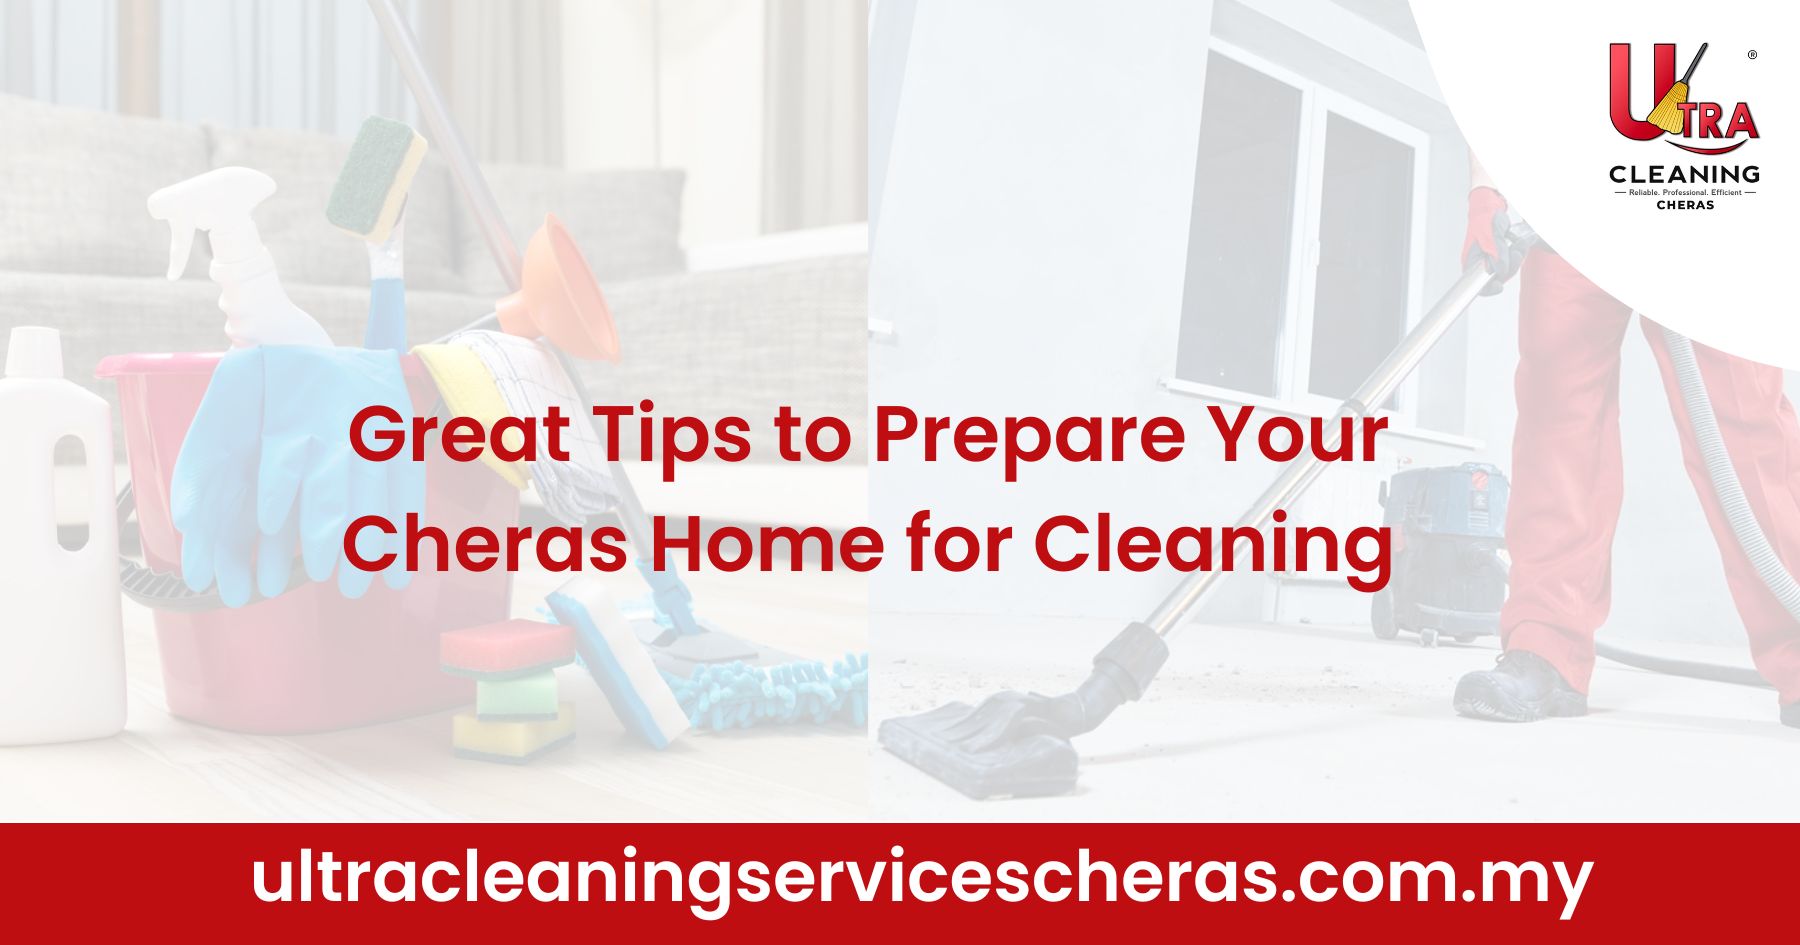 Great Tips to Prepare Your Cheras Home for Cleaning